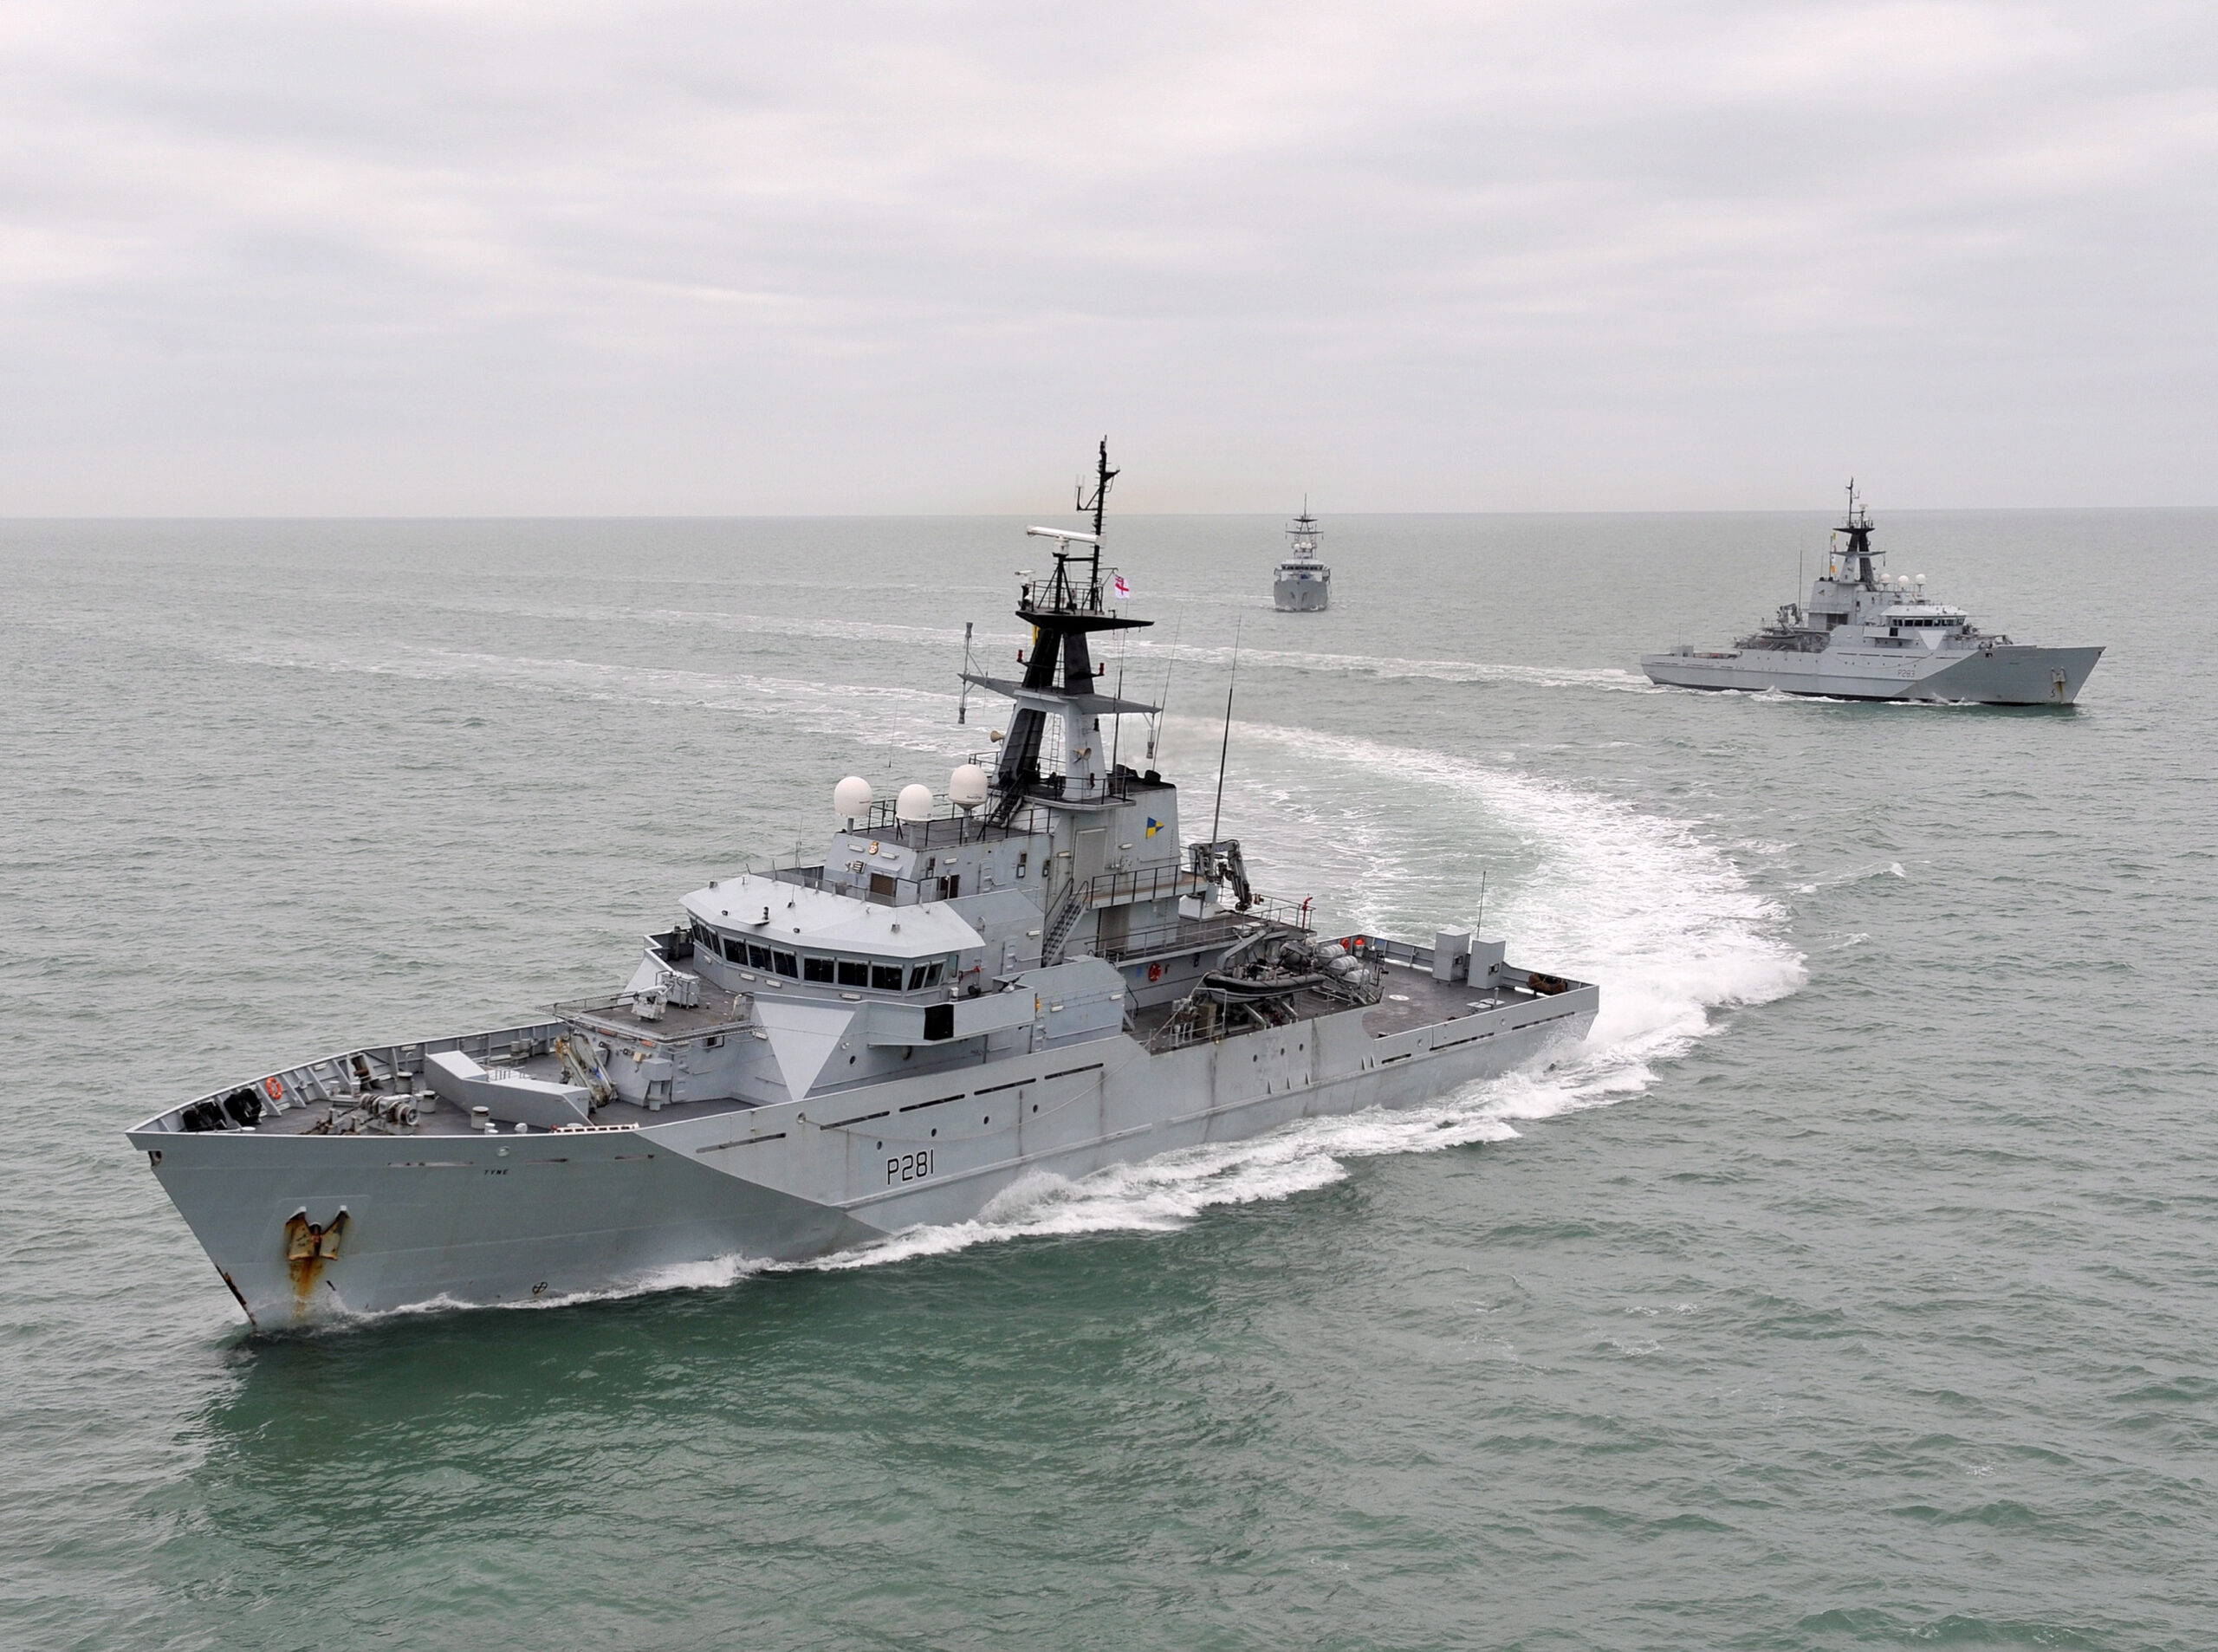 Library Image: The three River-class patrol vessels of the Fishery Protection Squadron, HMS Mersey, HMS Severn and HMS Tyne (foreground) exercising off the coast of Cornwall. FIRST STEEL CUT ON £348 MILLION ROYAL NAVY WARSHIP CONTRACT Steel was cut today for the first of three new Royal Navy offshore patrol vessels (OPVs) at a ceremony in Glasgow attended by the Secretary of State for Scotland and the Ministry of Defence’s (MoD) Chief of Defence Materiel. The vessels, which will be used by the Royal Navy to undertake various tasks in support of UK interests both at home and abroad, will be built at BAE Systems’ shipyards in a contract that has protected more than 800 Scottish jobs.